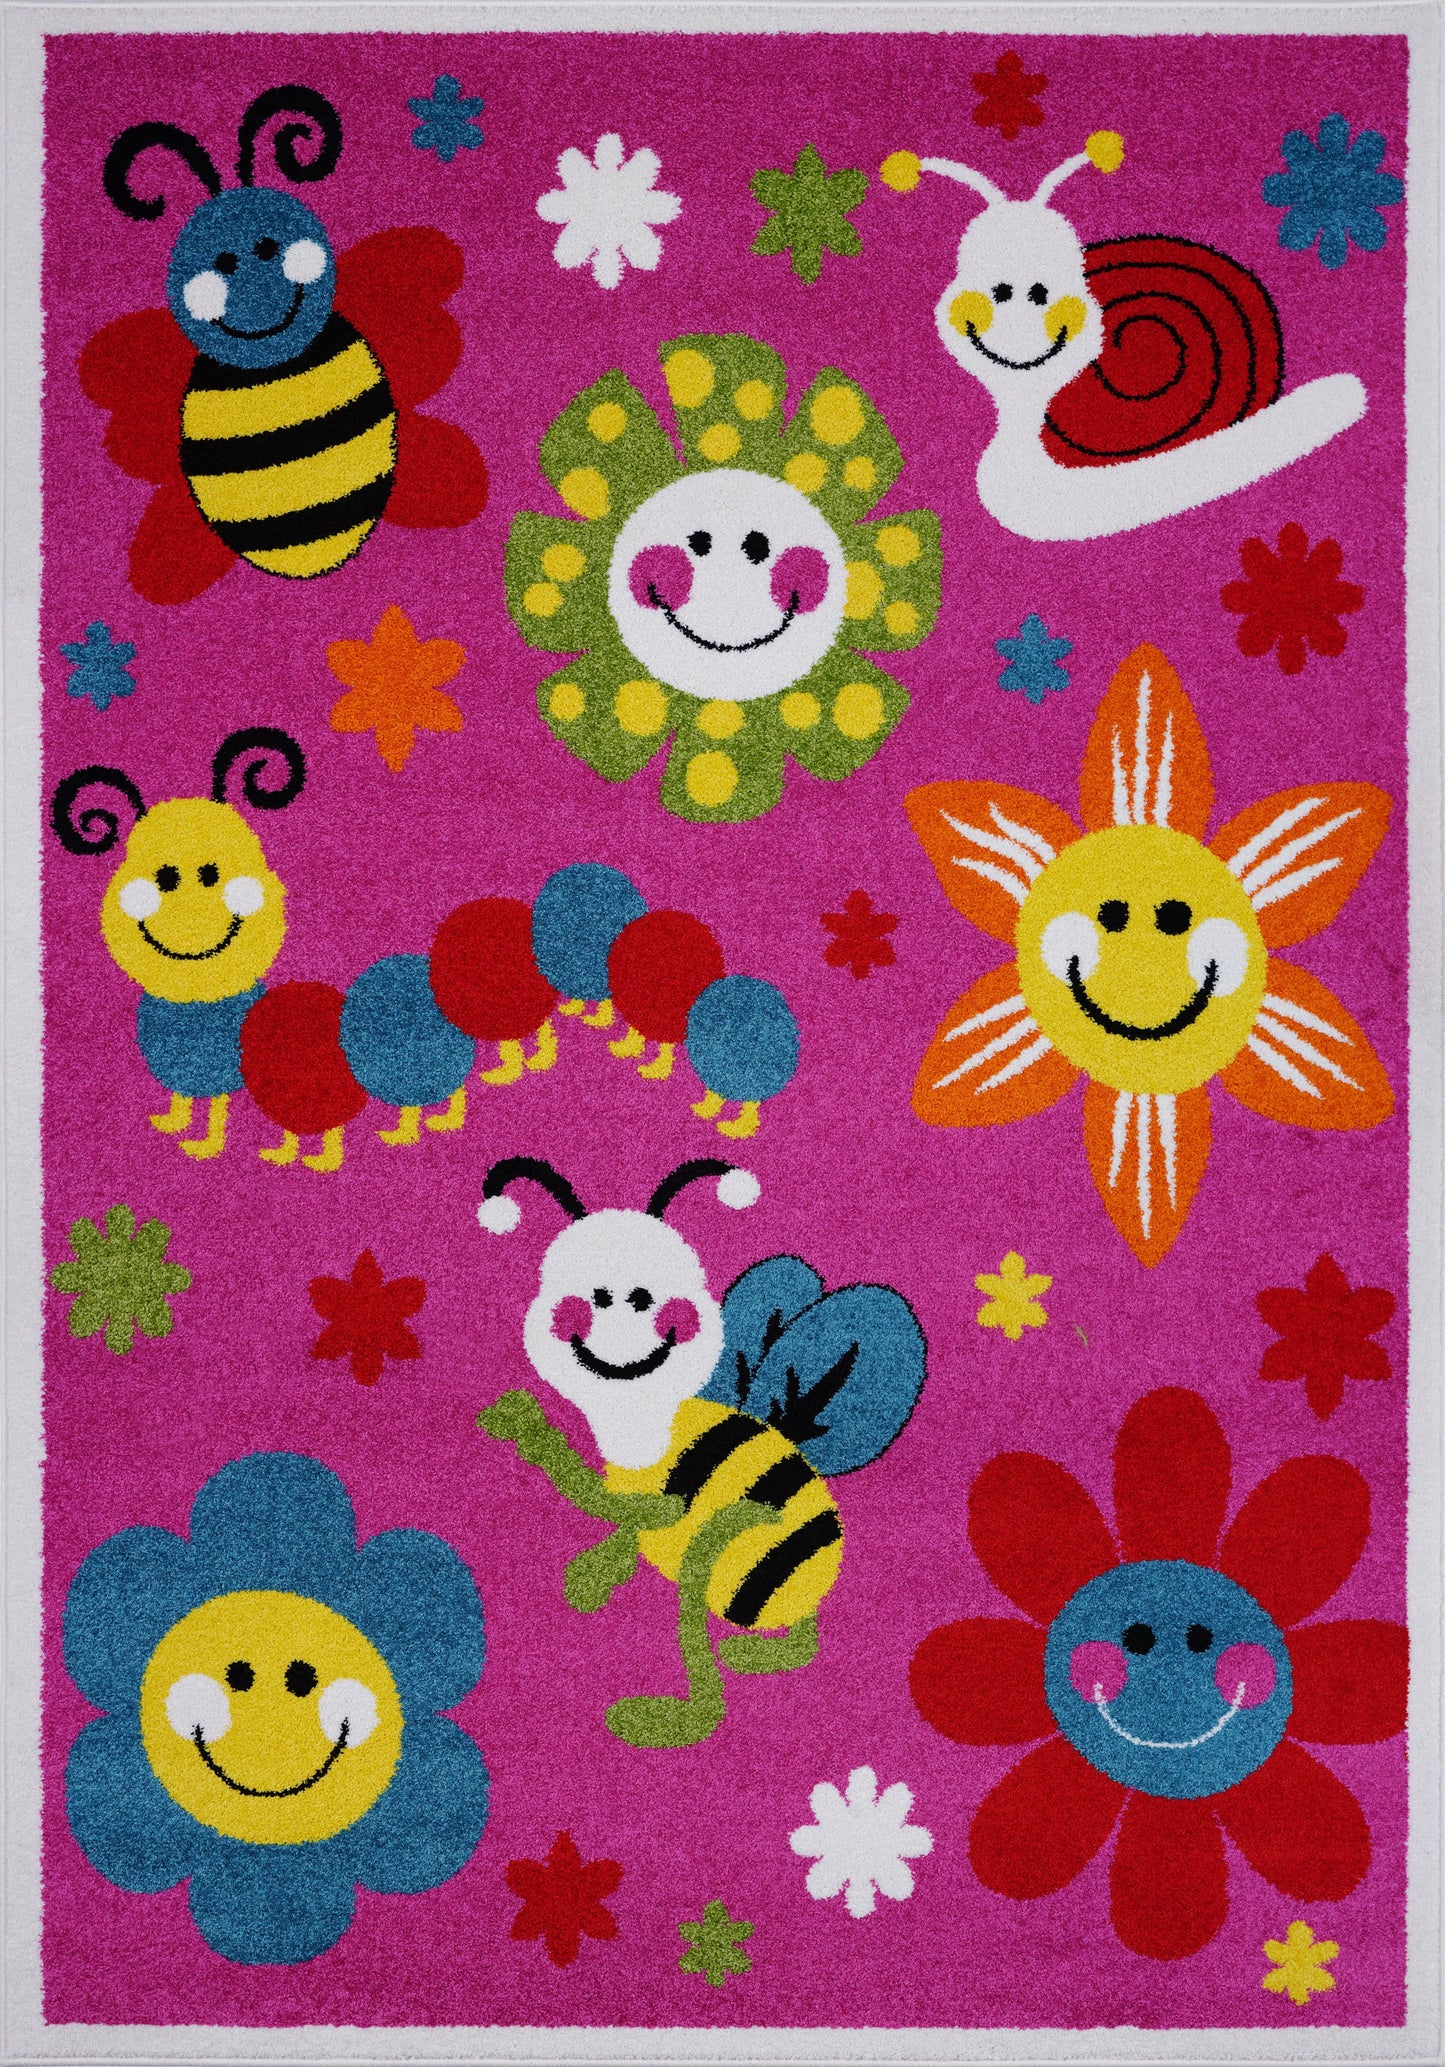 Cute Bees and Flowers Smiley Faces Kids Area Rug Carpet, Pink